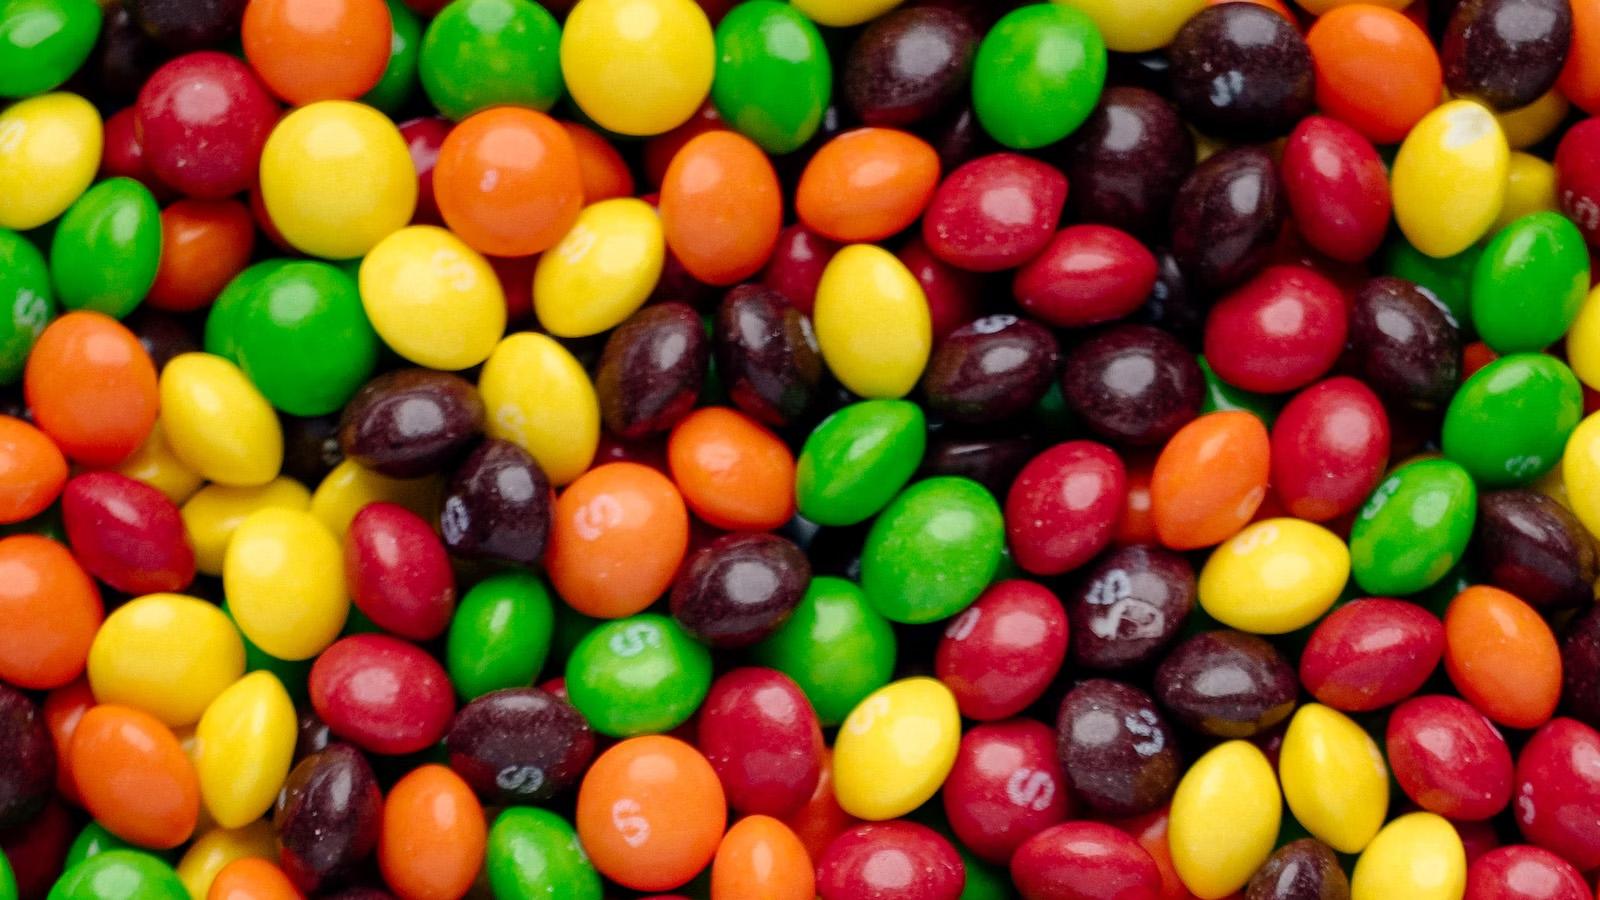 Skittles faces 3-year countdown after California bans cancer-causing food additives